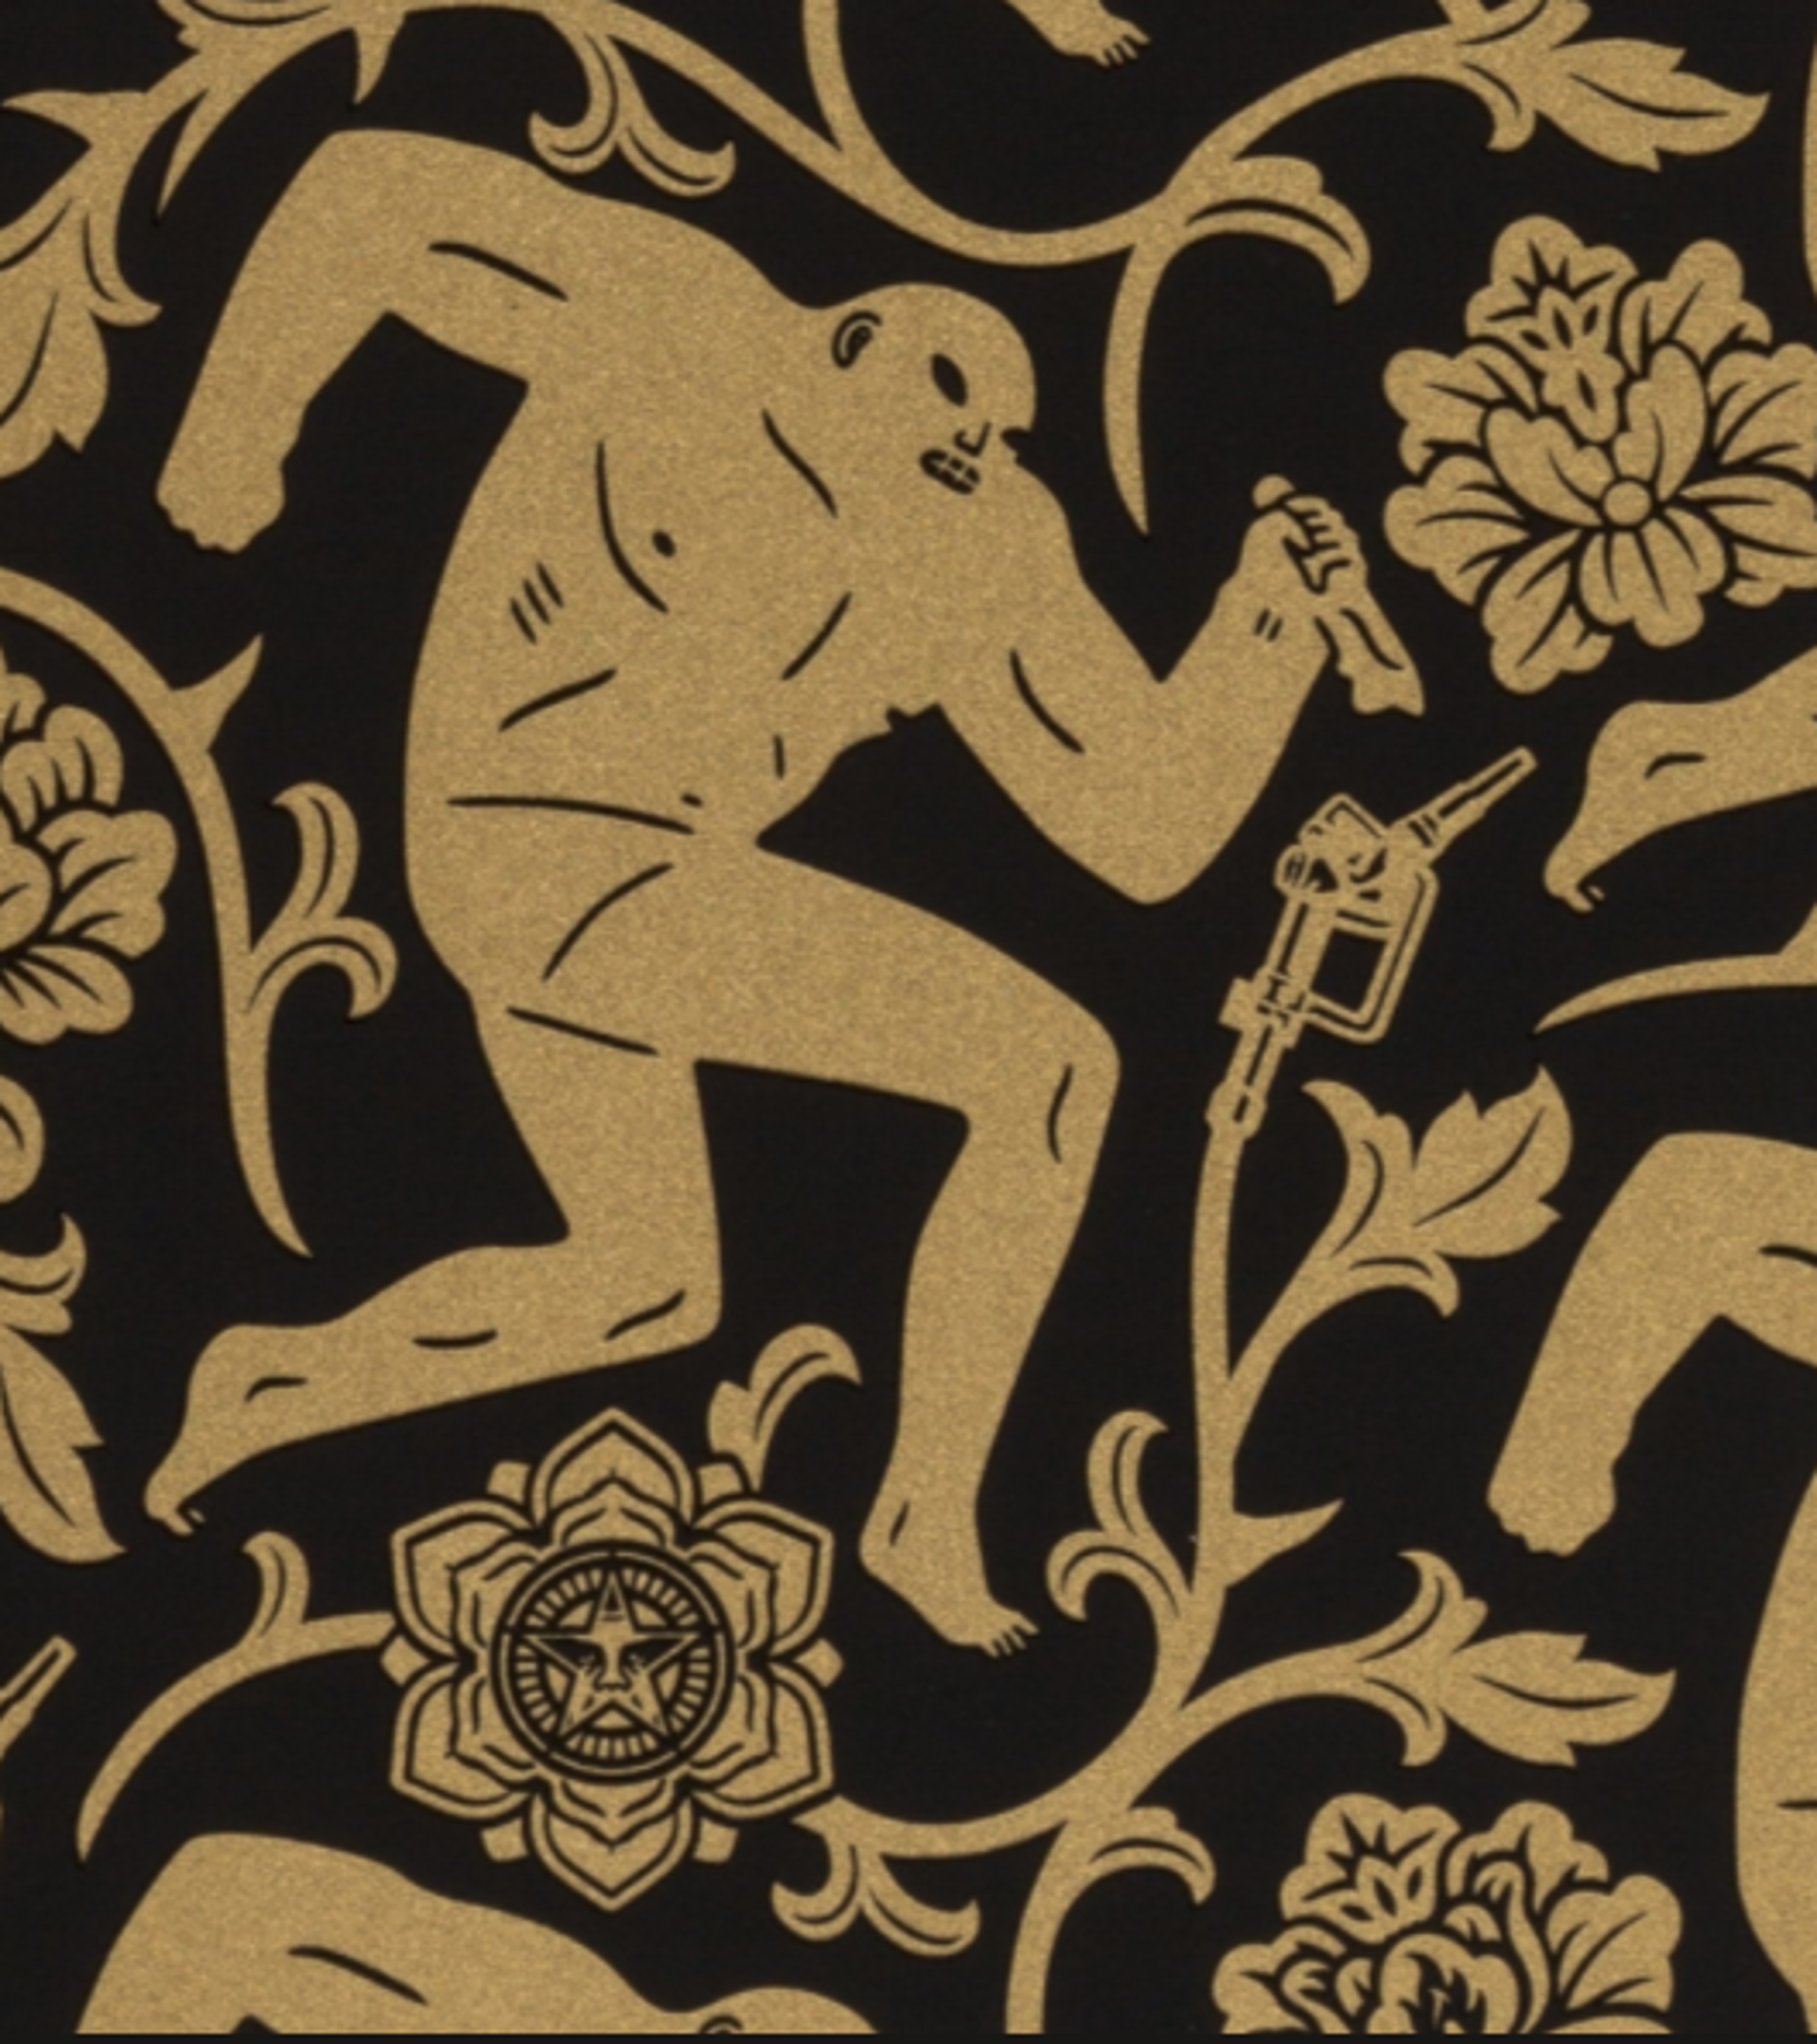 Pattern of Corruption (Black) A.P. | Cleon Peterson X Shepard Fairey by Cleon Peterson